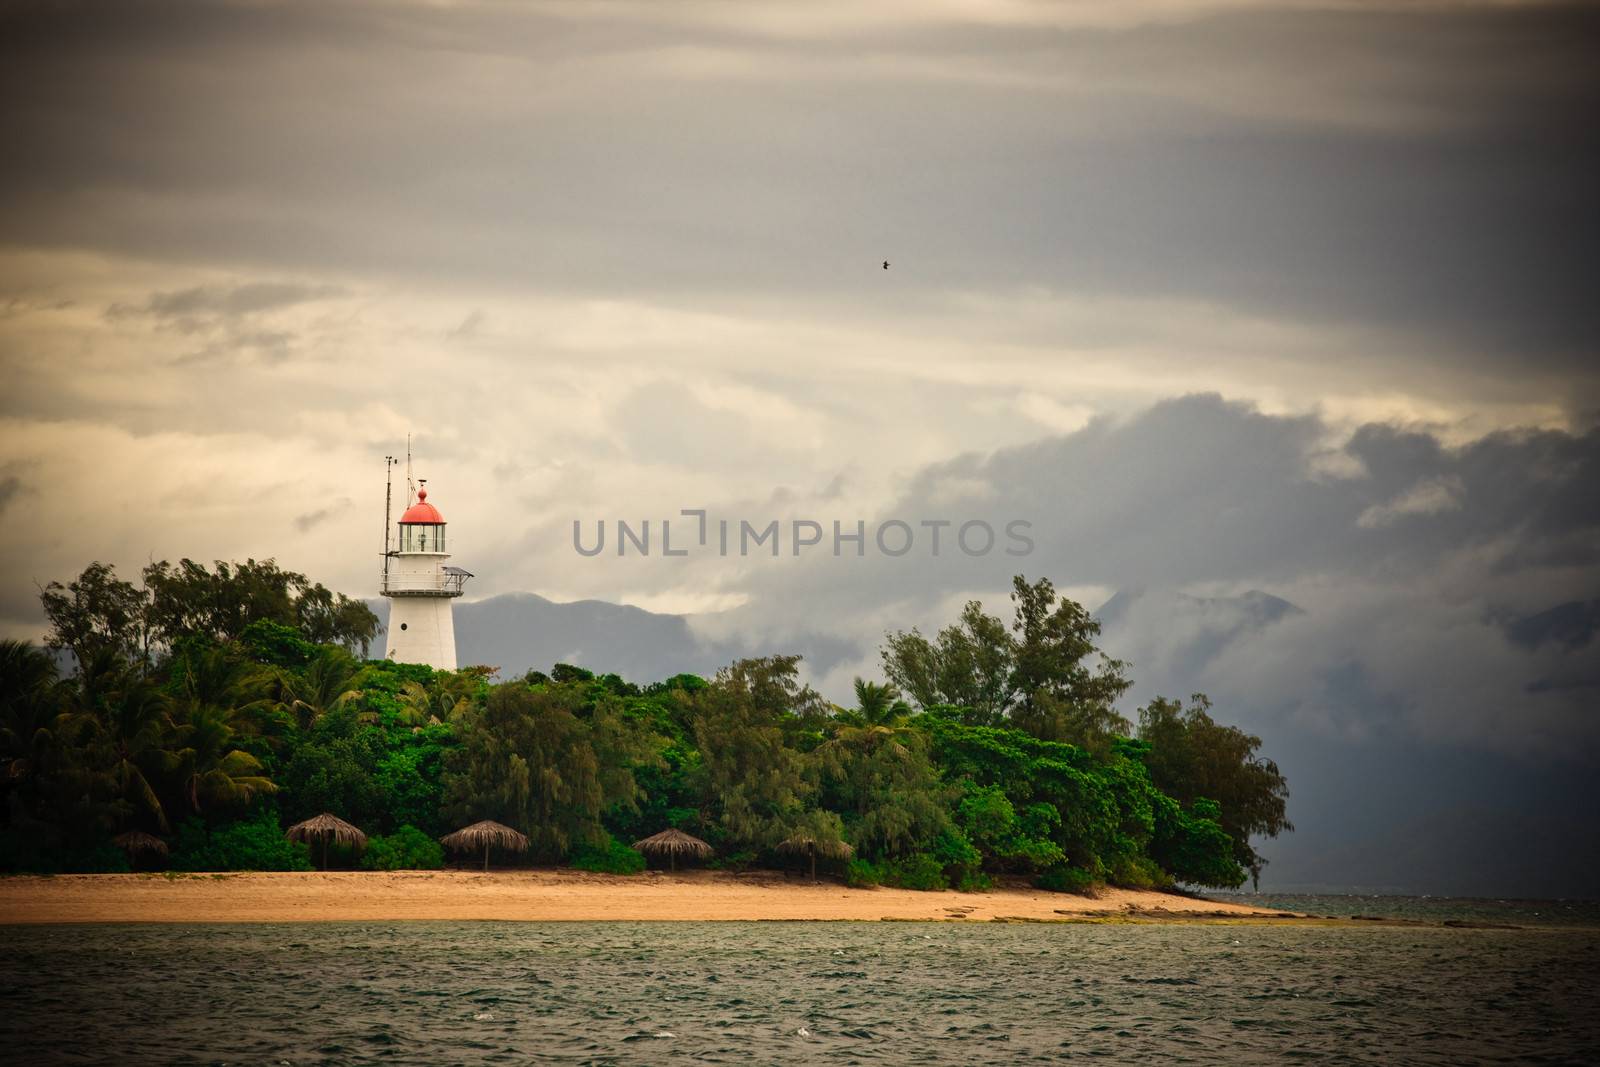 Lighthouse to warn ships and act as a navigation beacon on the Australian coast on a sandy peninsula with lush tropical vegetation under a cloudy sky